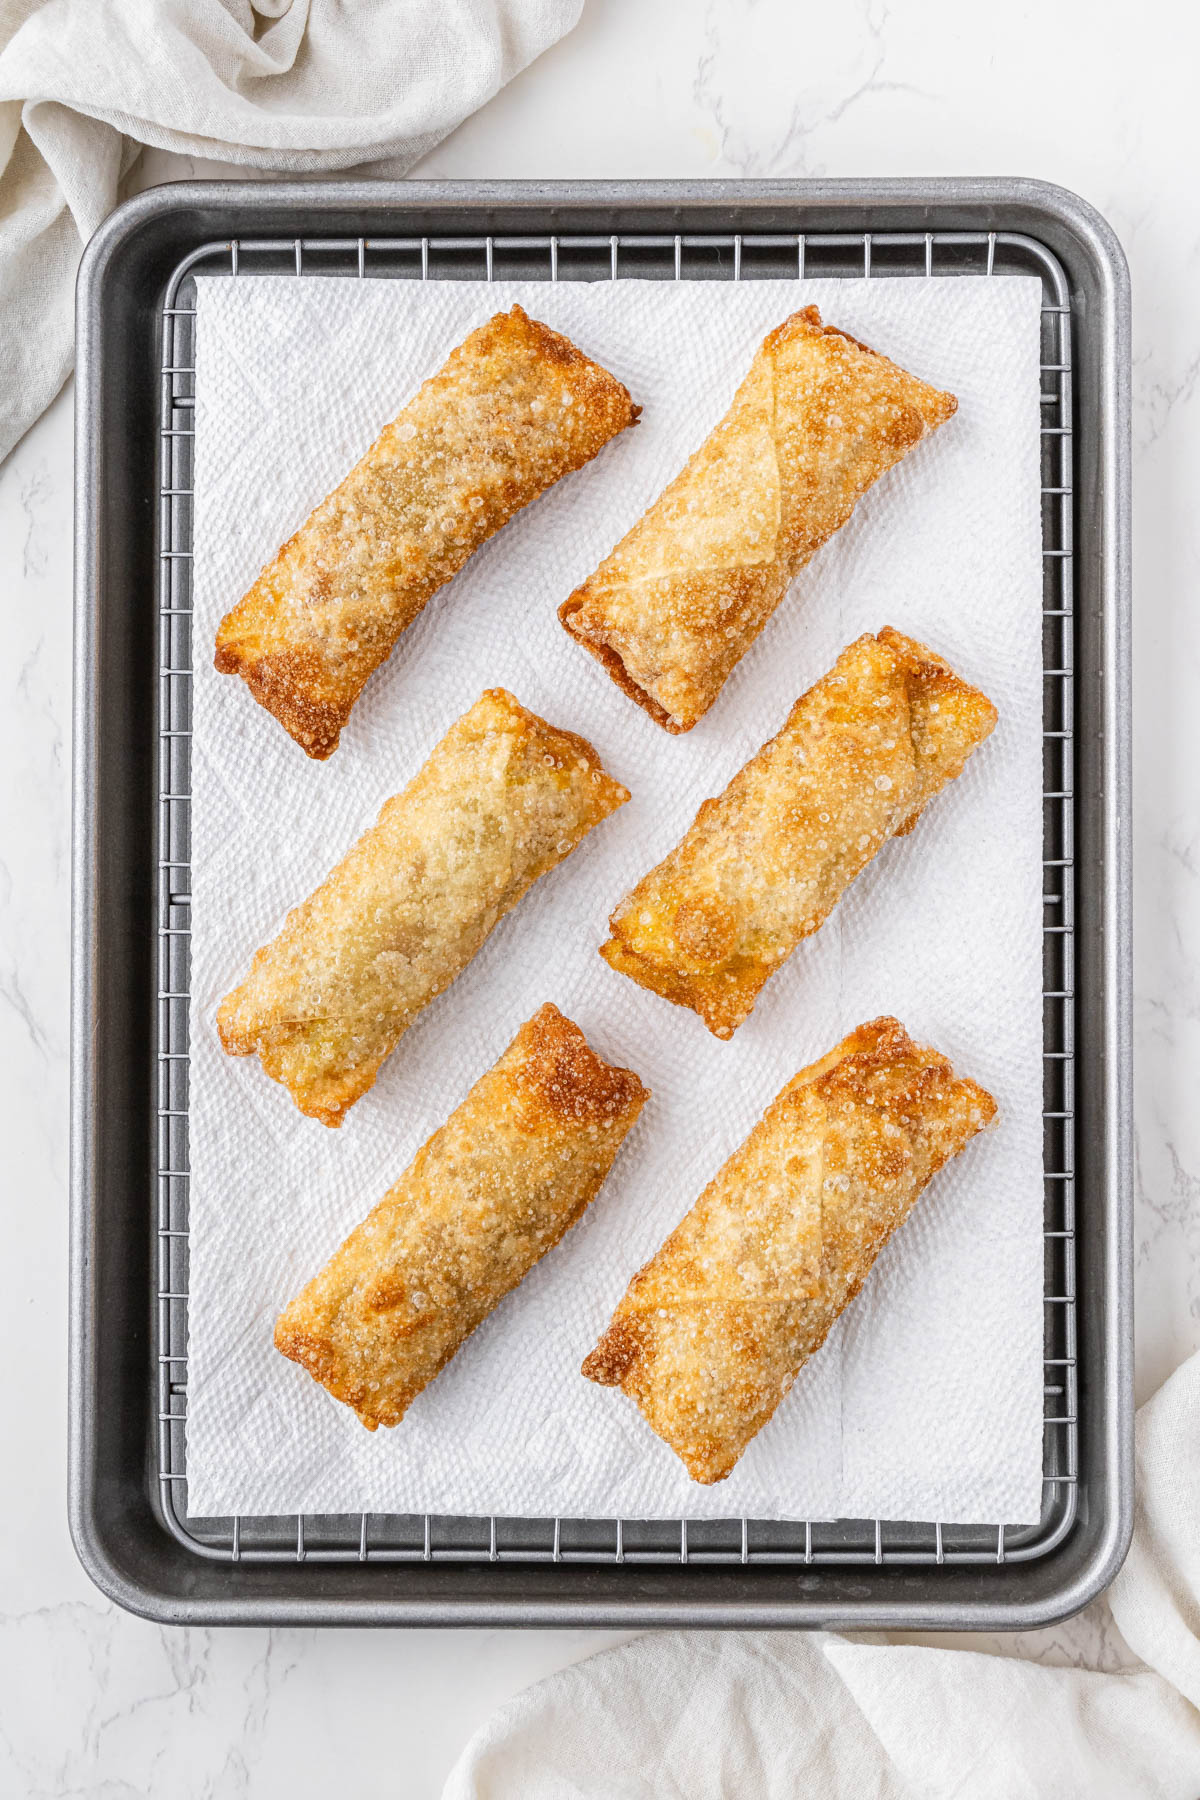 cooked panda express chicken egg rolls laying on parchment paper covered baking sheet